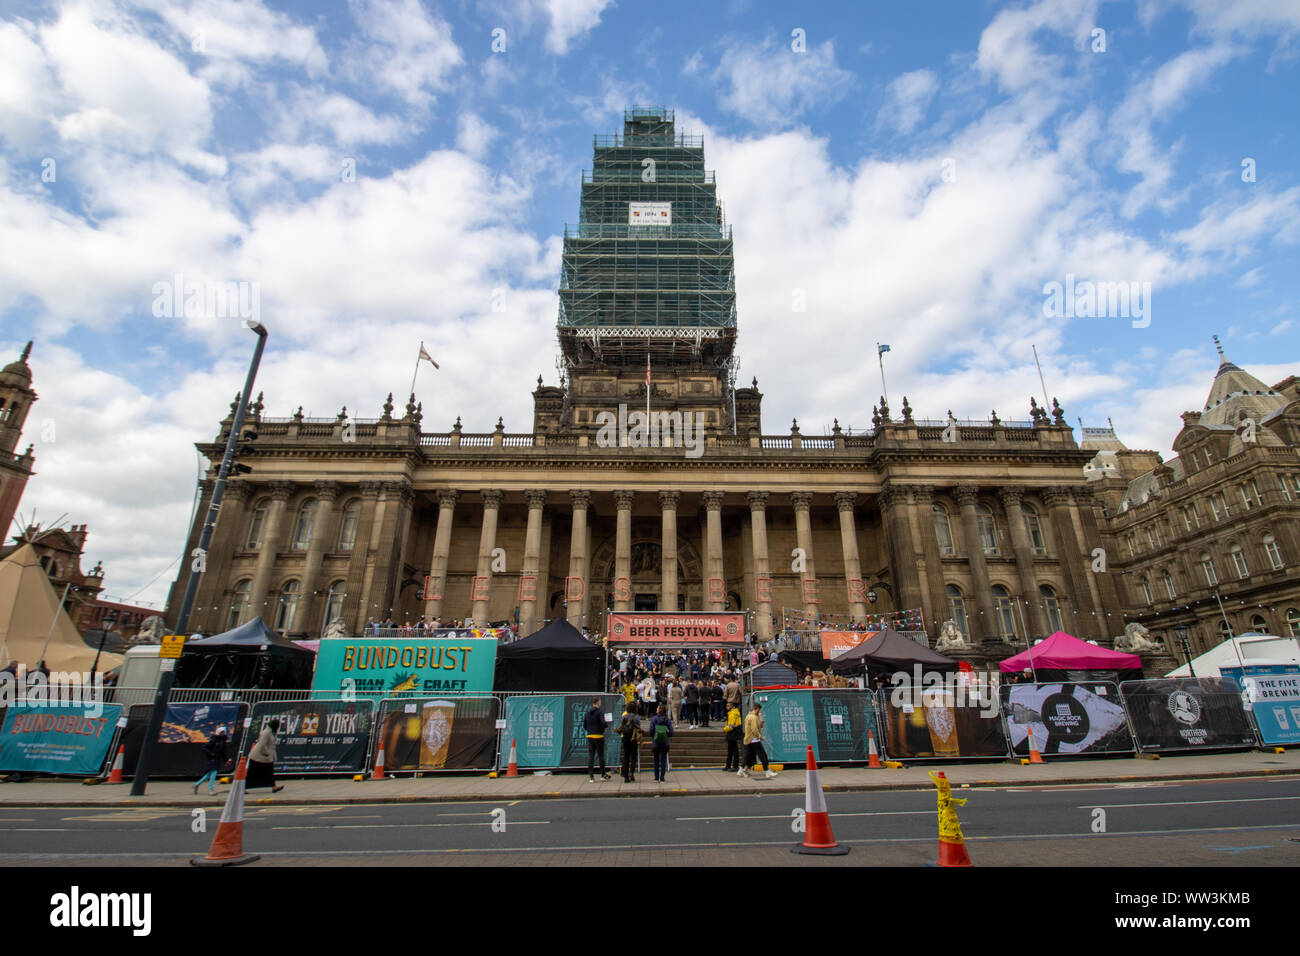 Leeds UK, 7th September 2019: The famous Beer festival located in the Leeds Town Centre outside the Leeds Town Hall on a bright sunny day Stock Photo